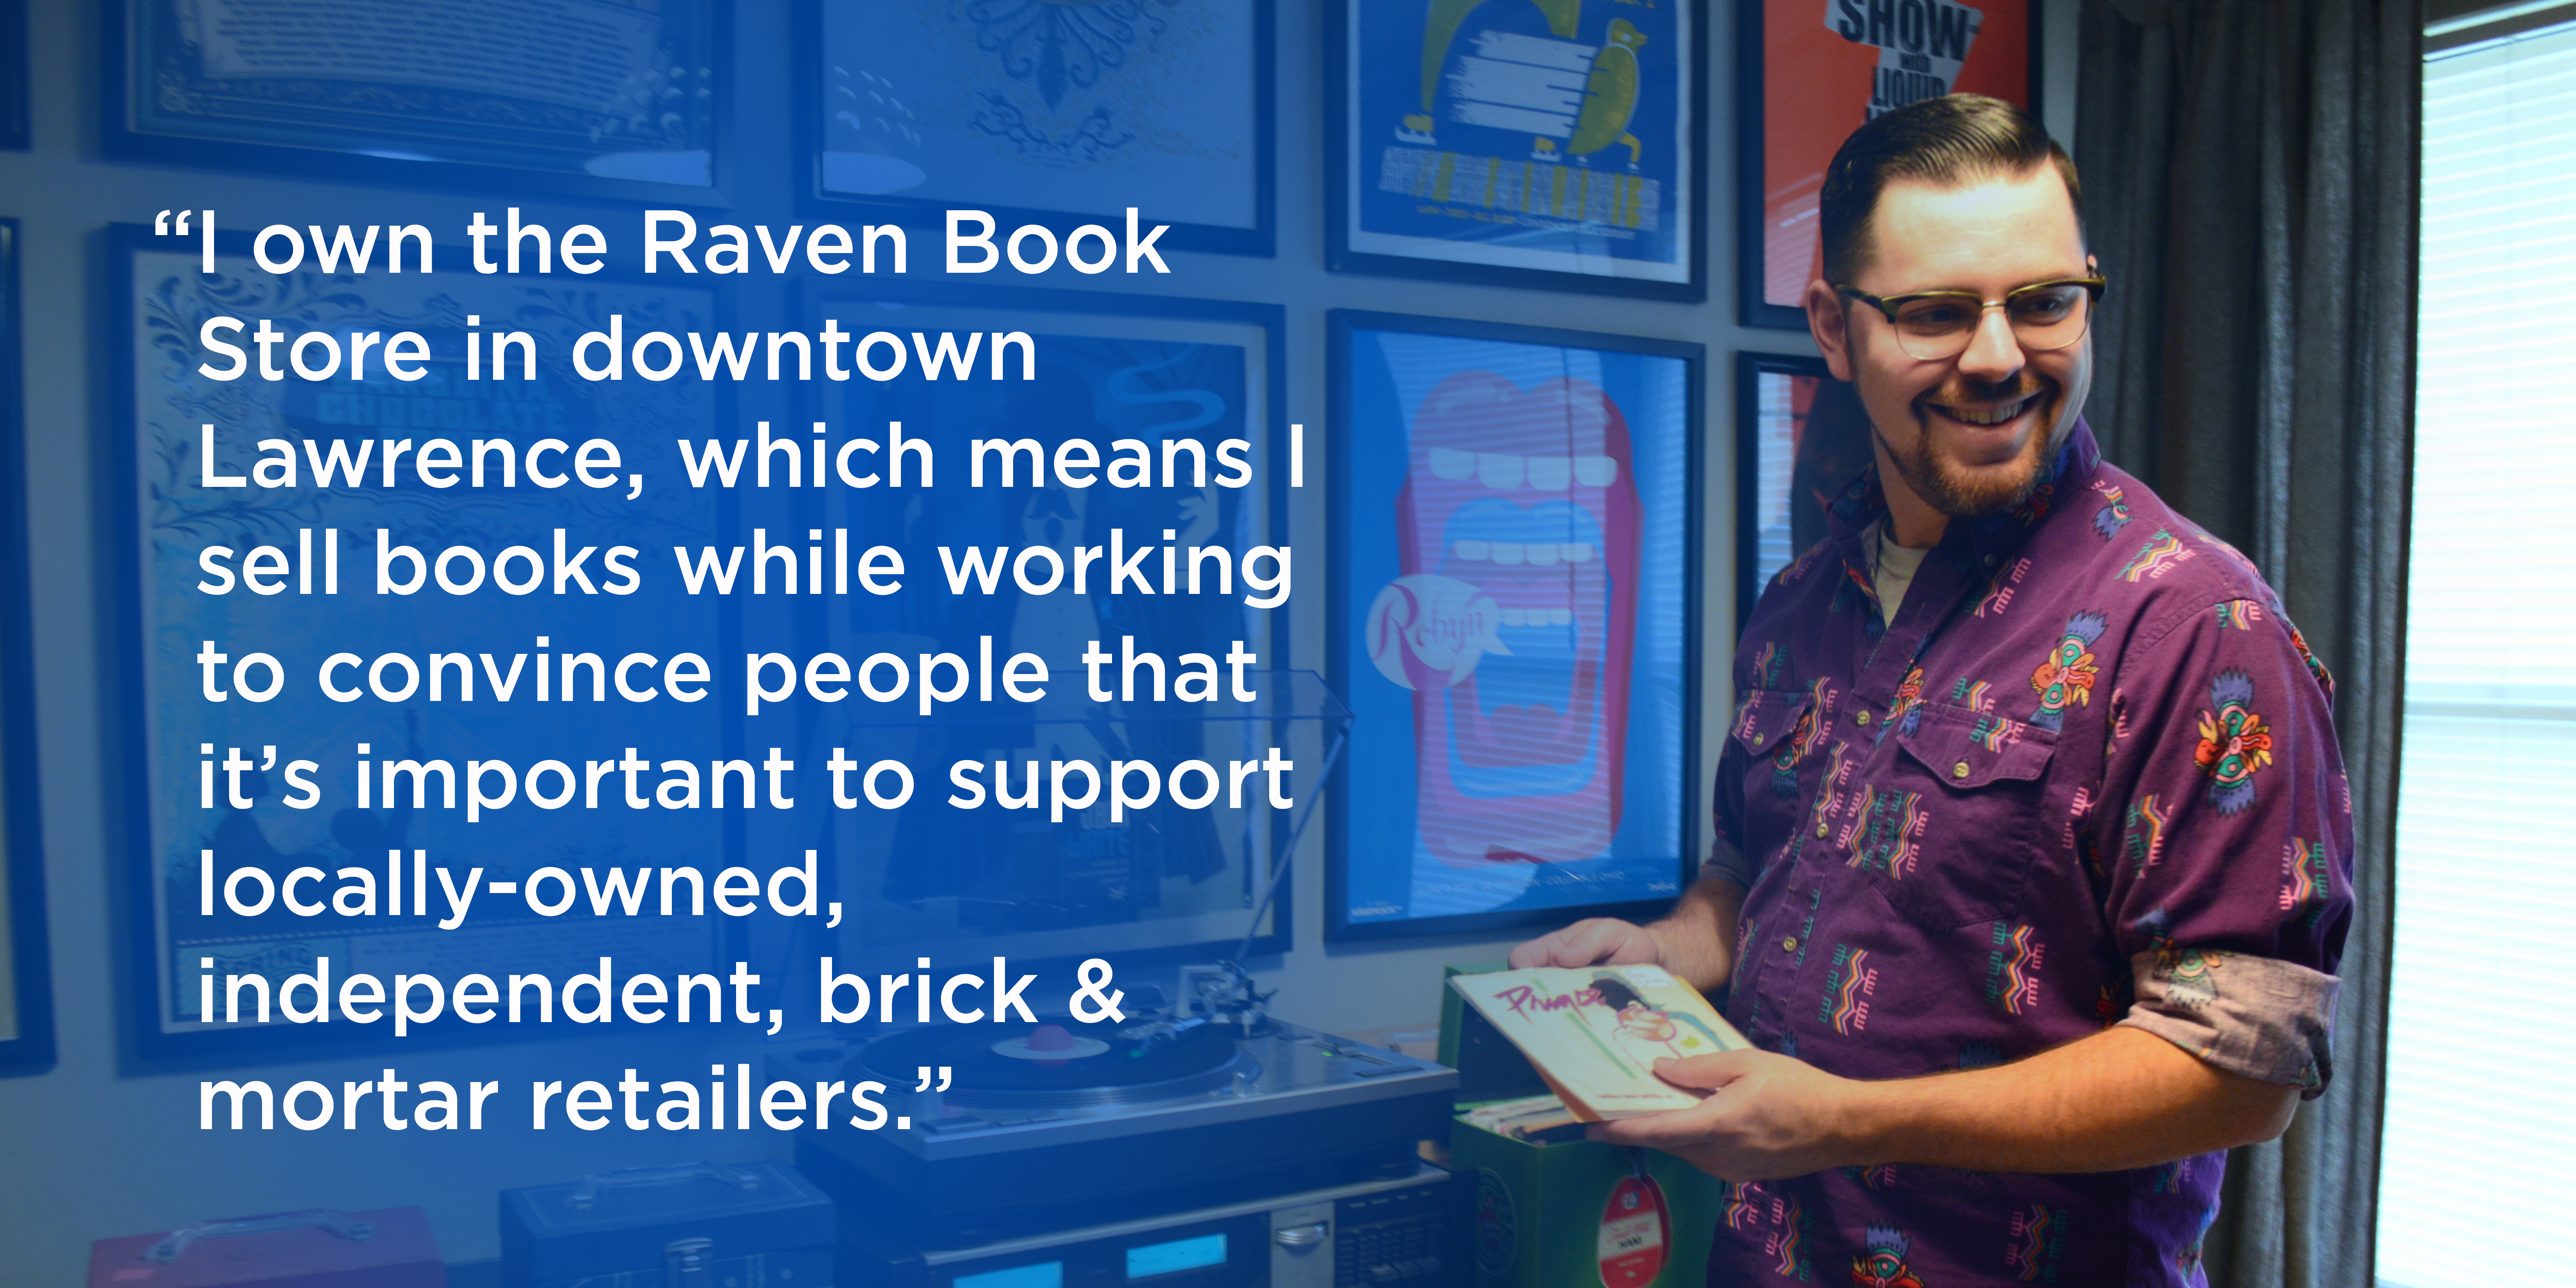 “I own the Raven Book Store in downtown Lawrence, which means I sell books while working to convince people that it’s important to support locally-owned, independent, brick & mortar retailers.”